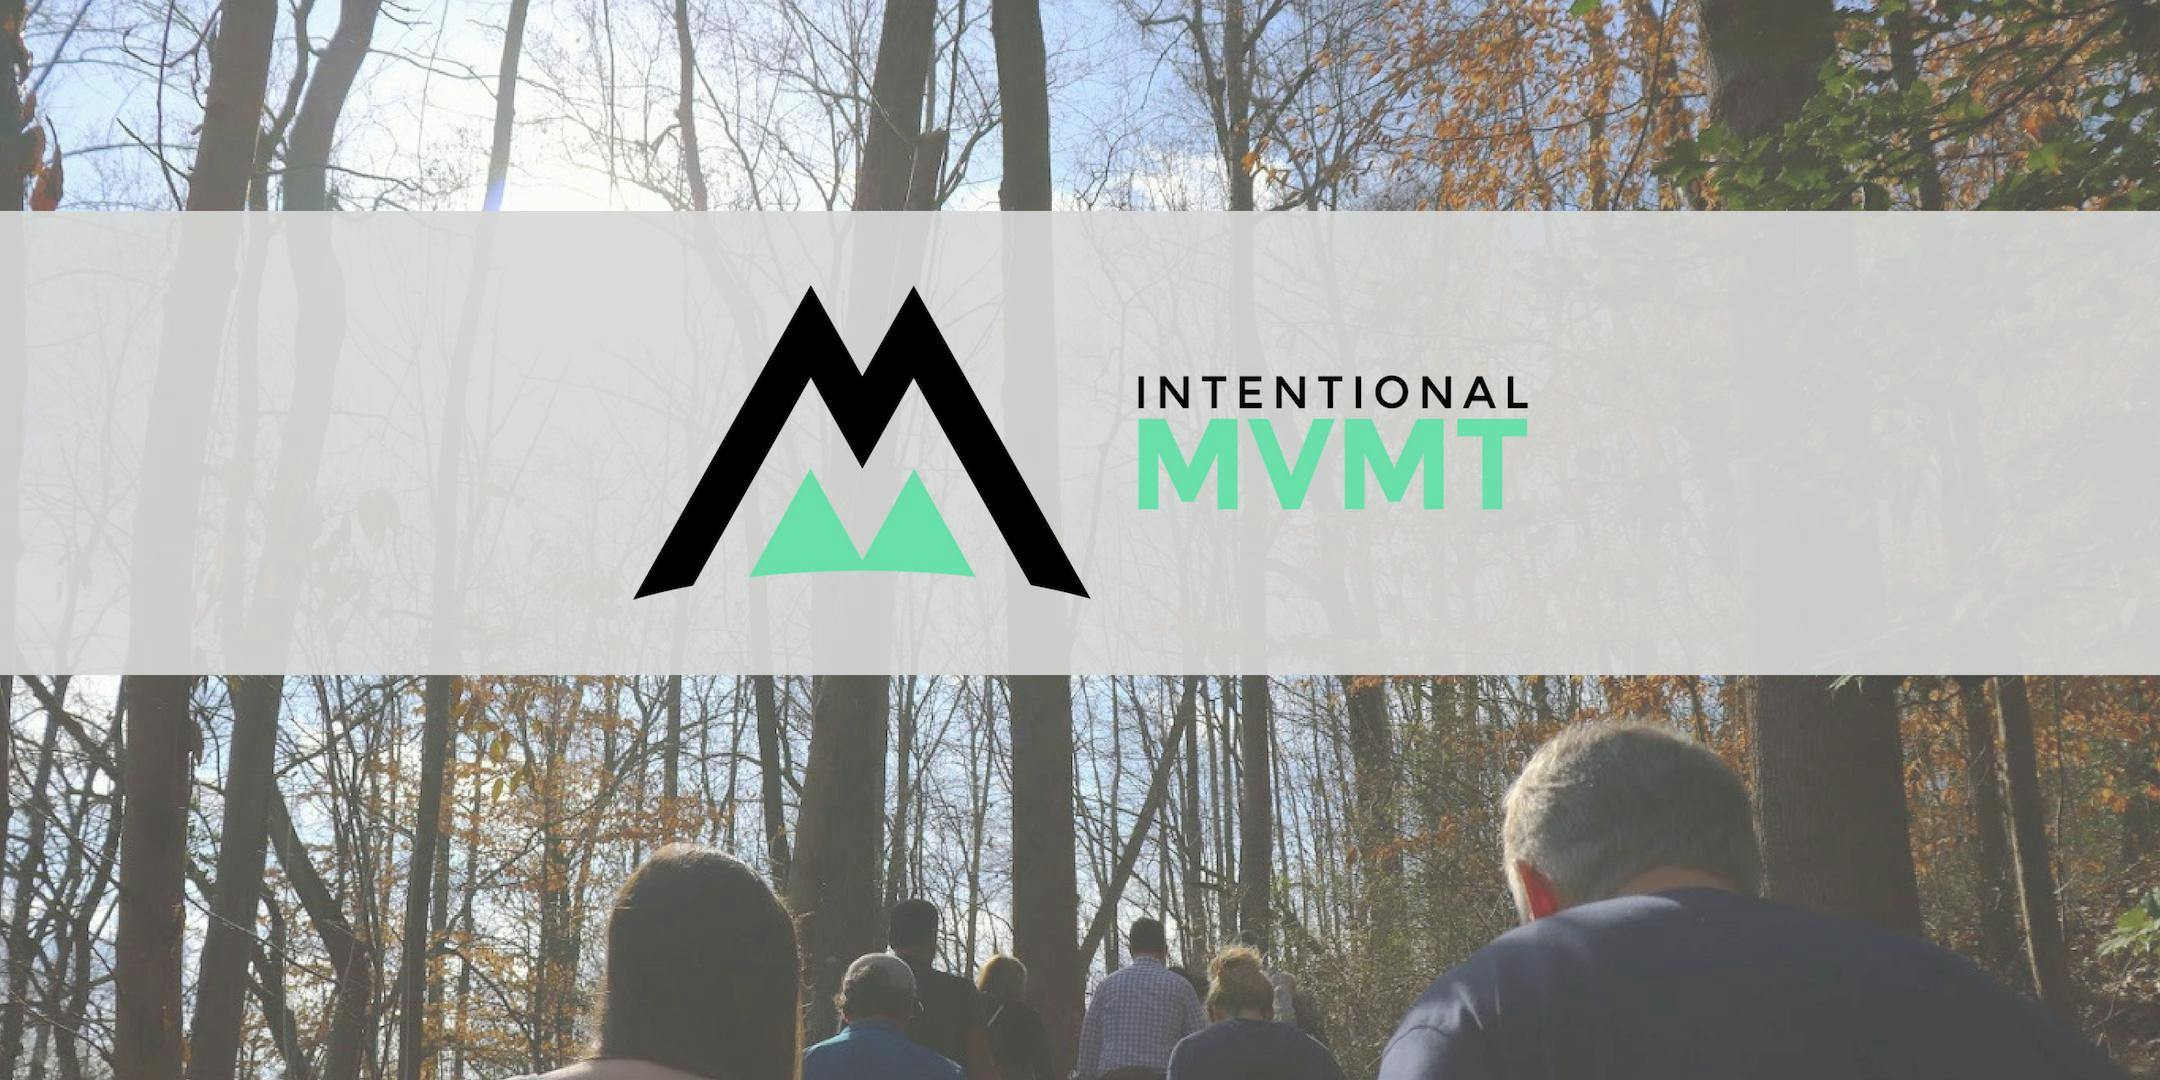 Intentional Movement at Reedy Creek Park - February 2019 